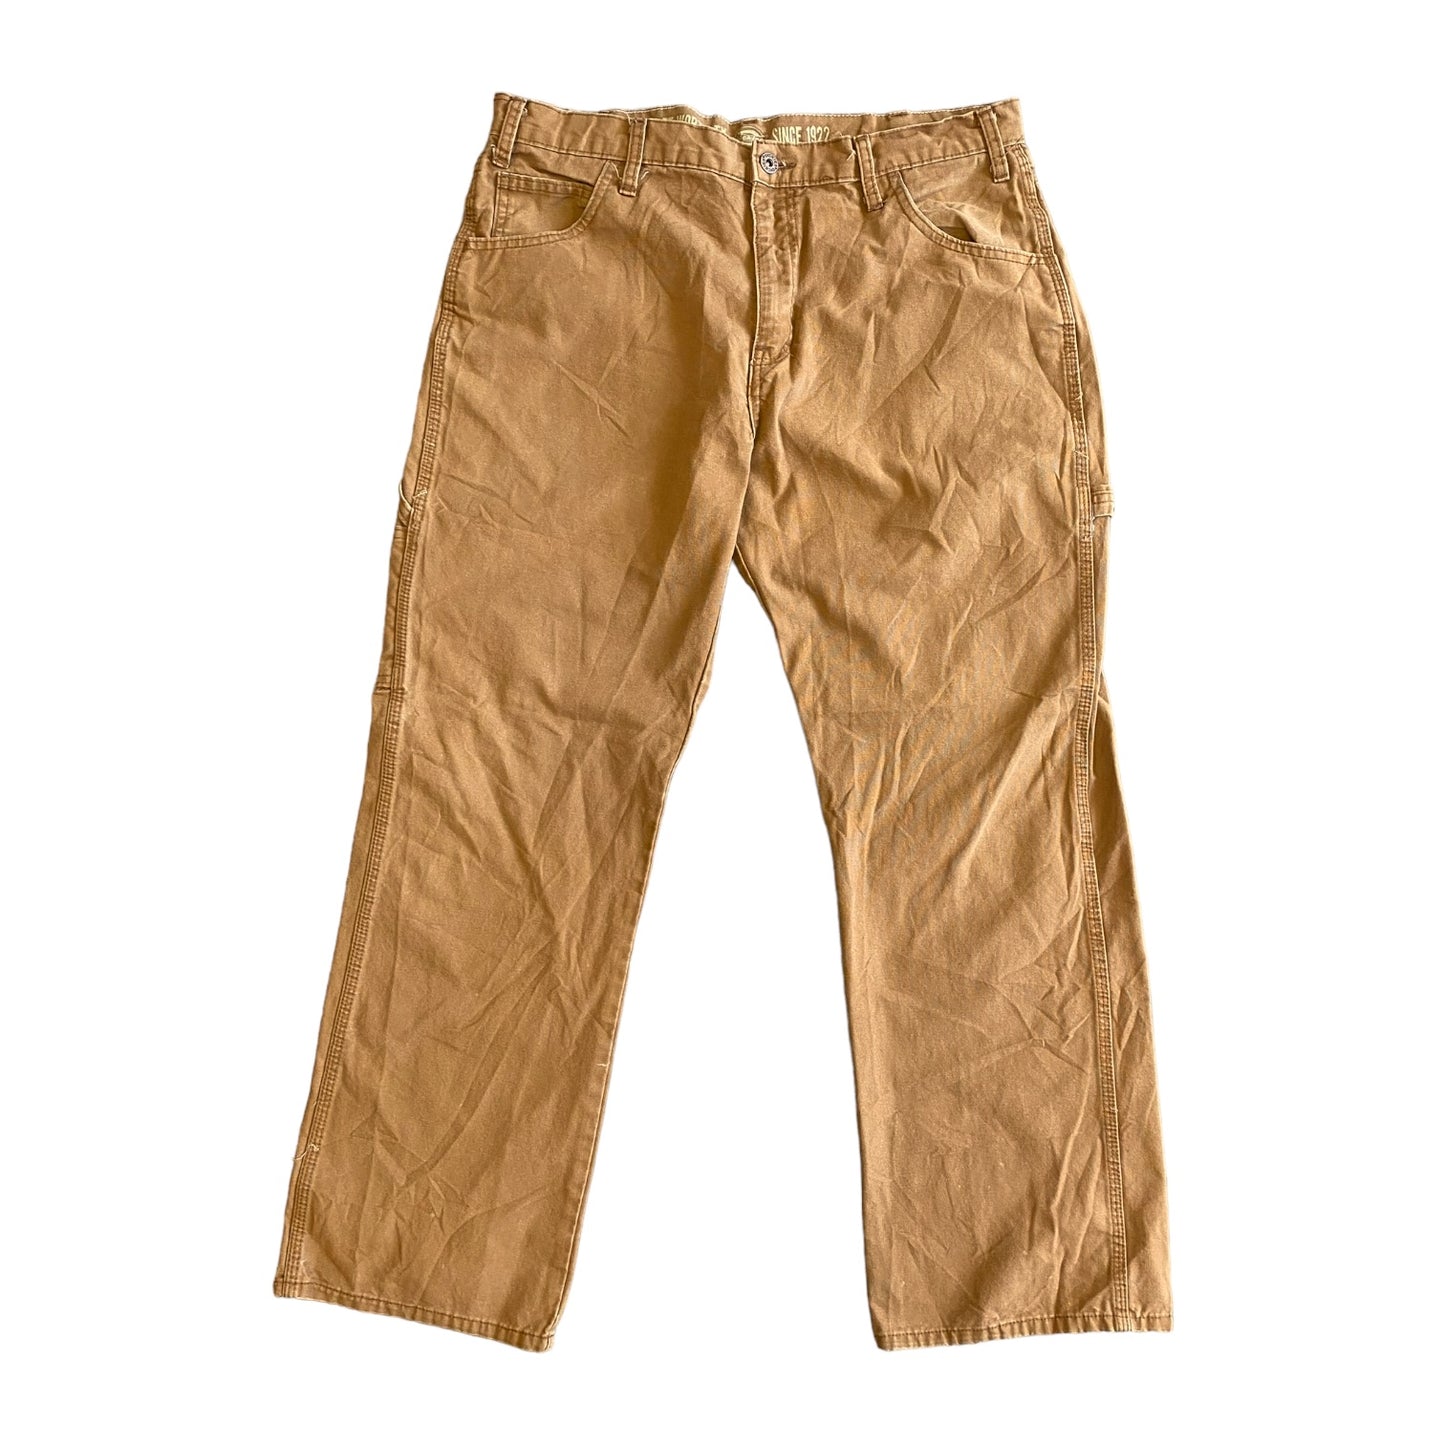 Dickies Classic Canvas Workwear pants